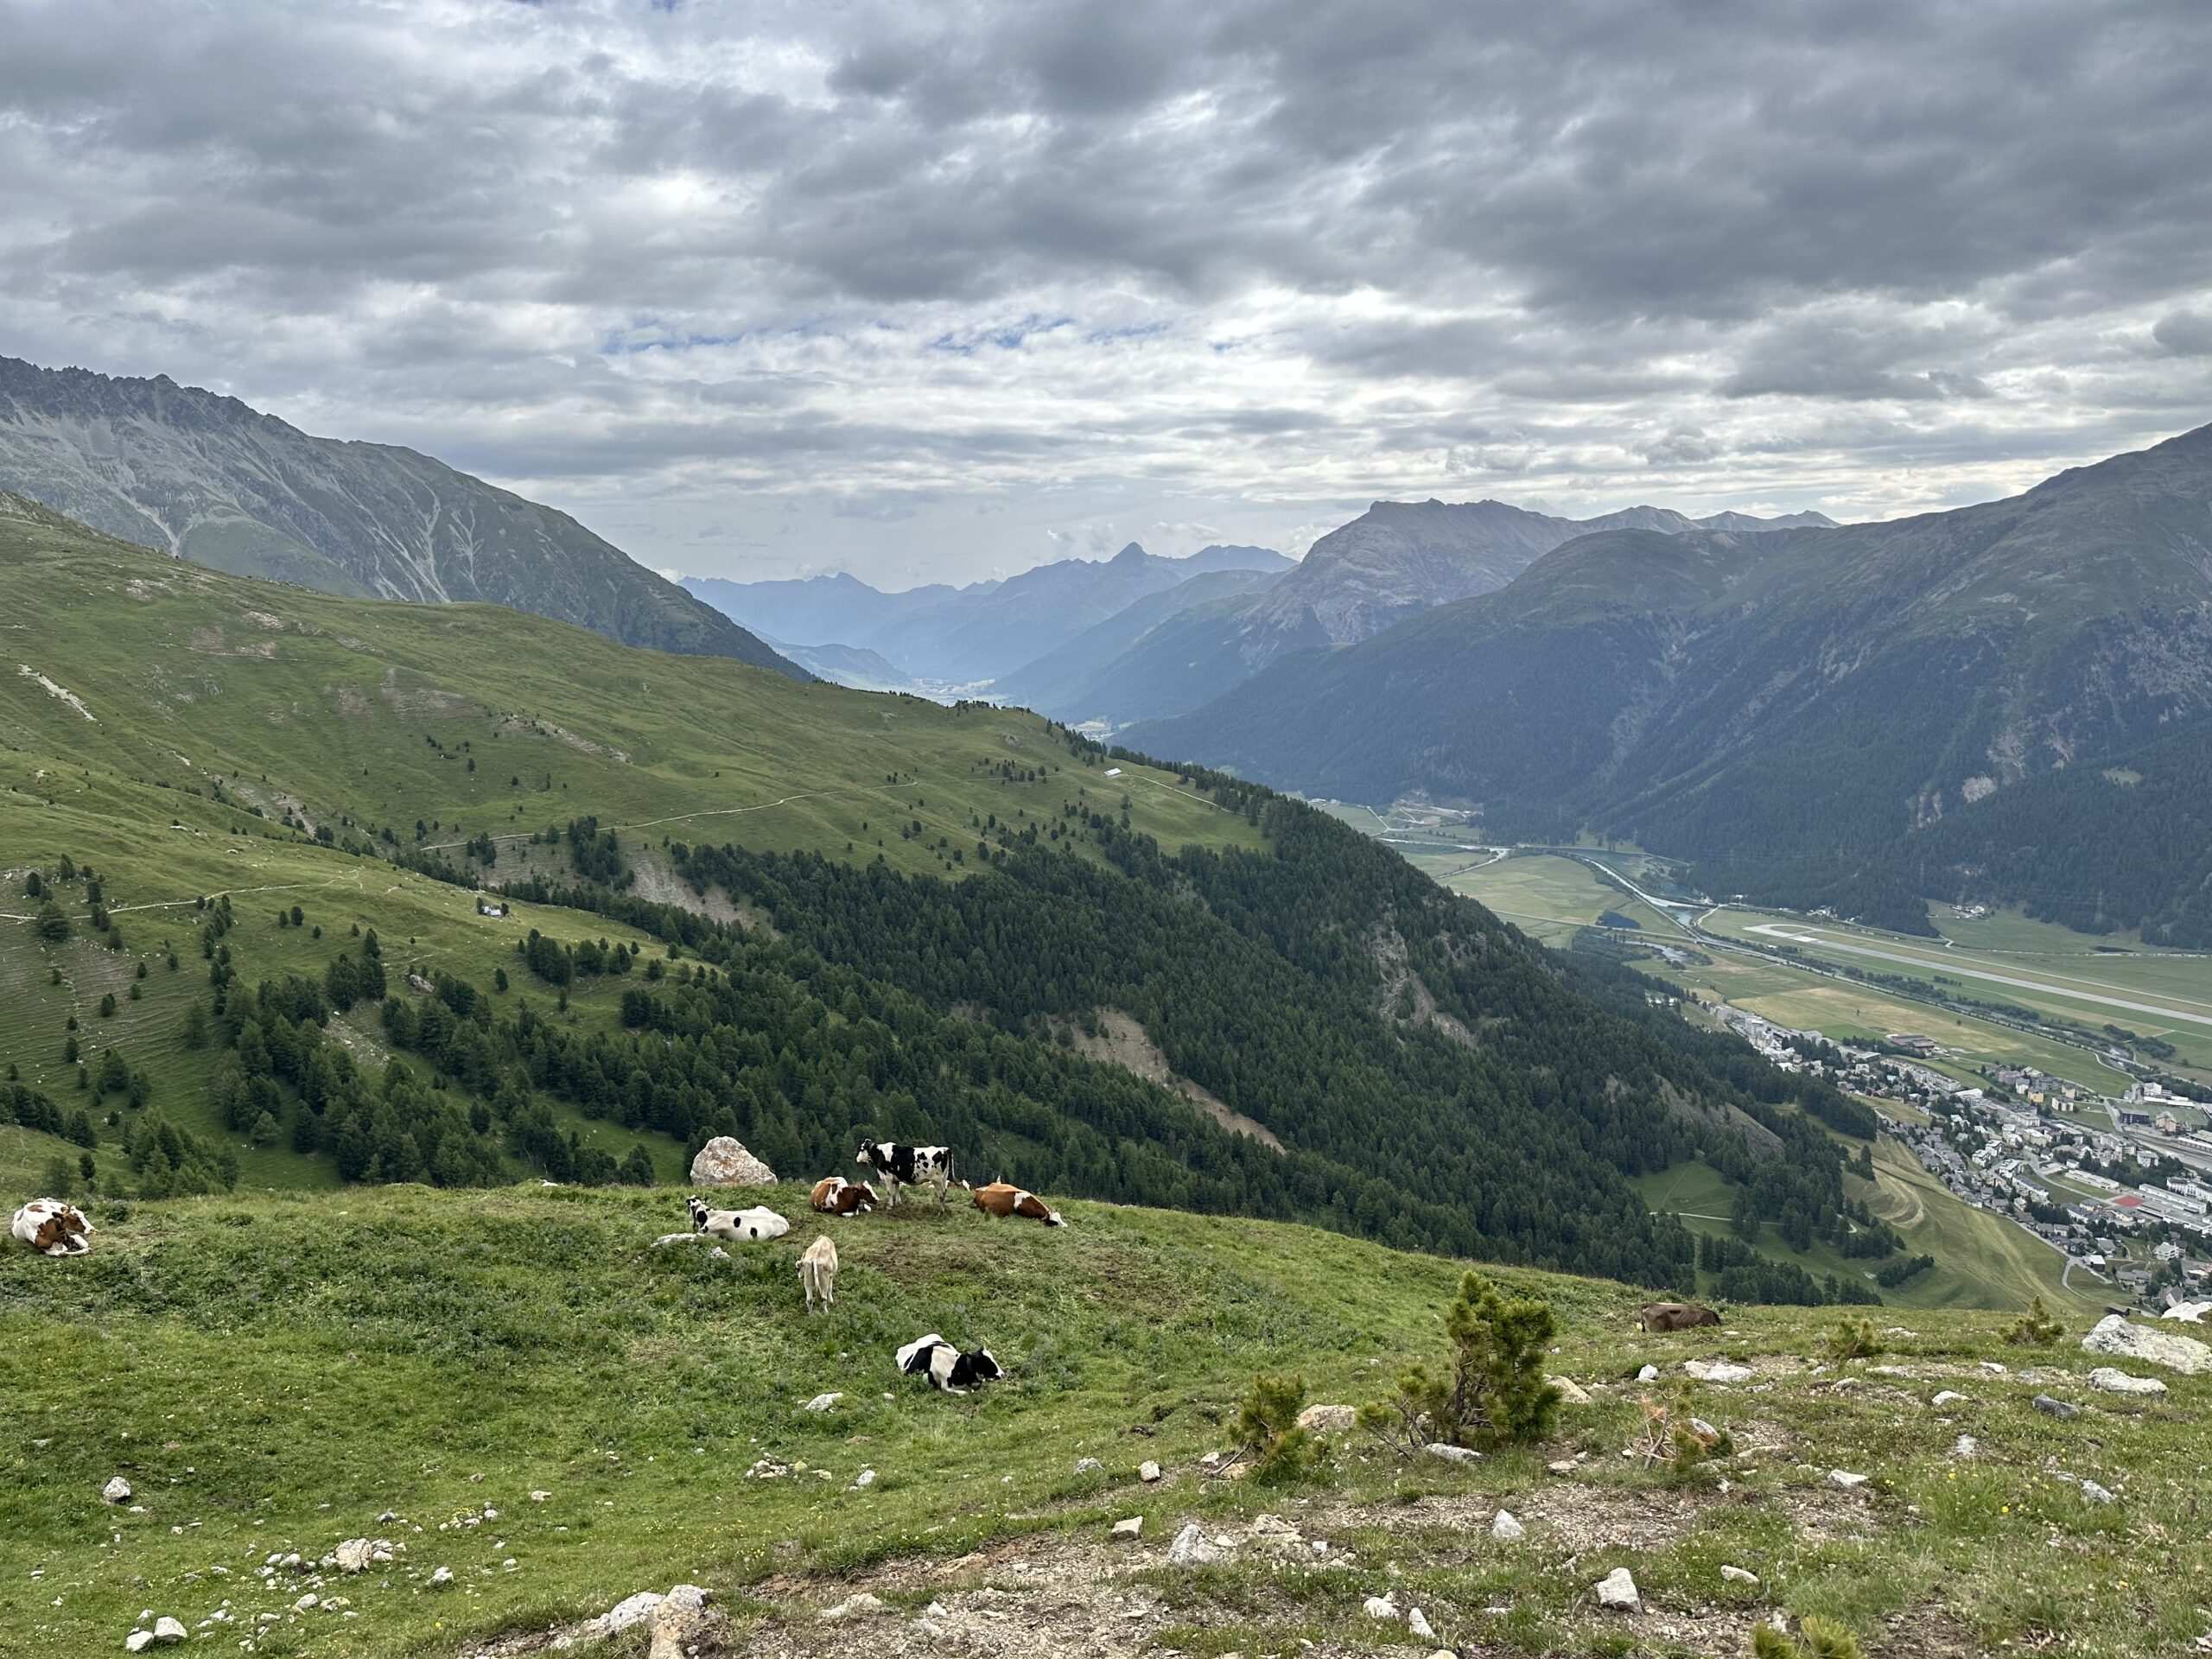 View of cows grazing on a hill above an alpine valley under a cloudy sky.